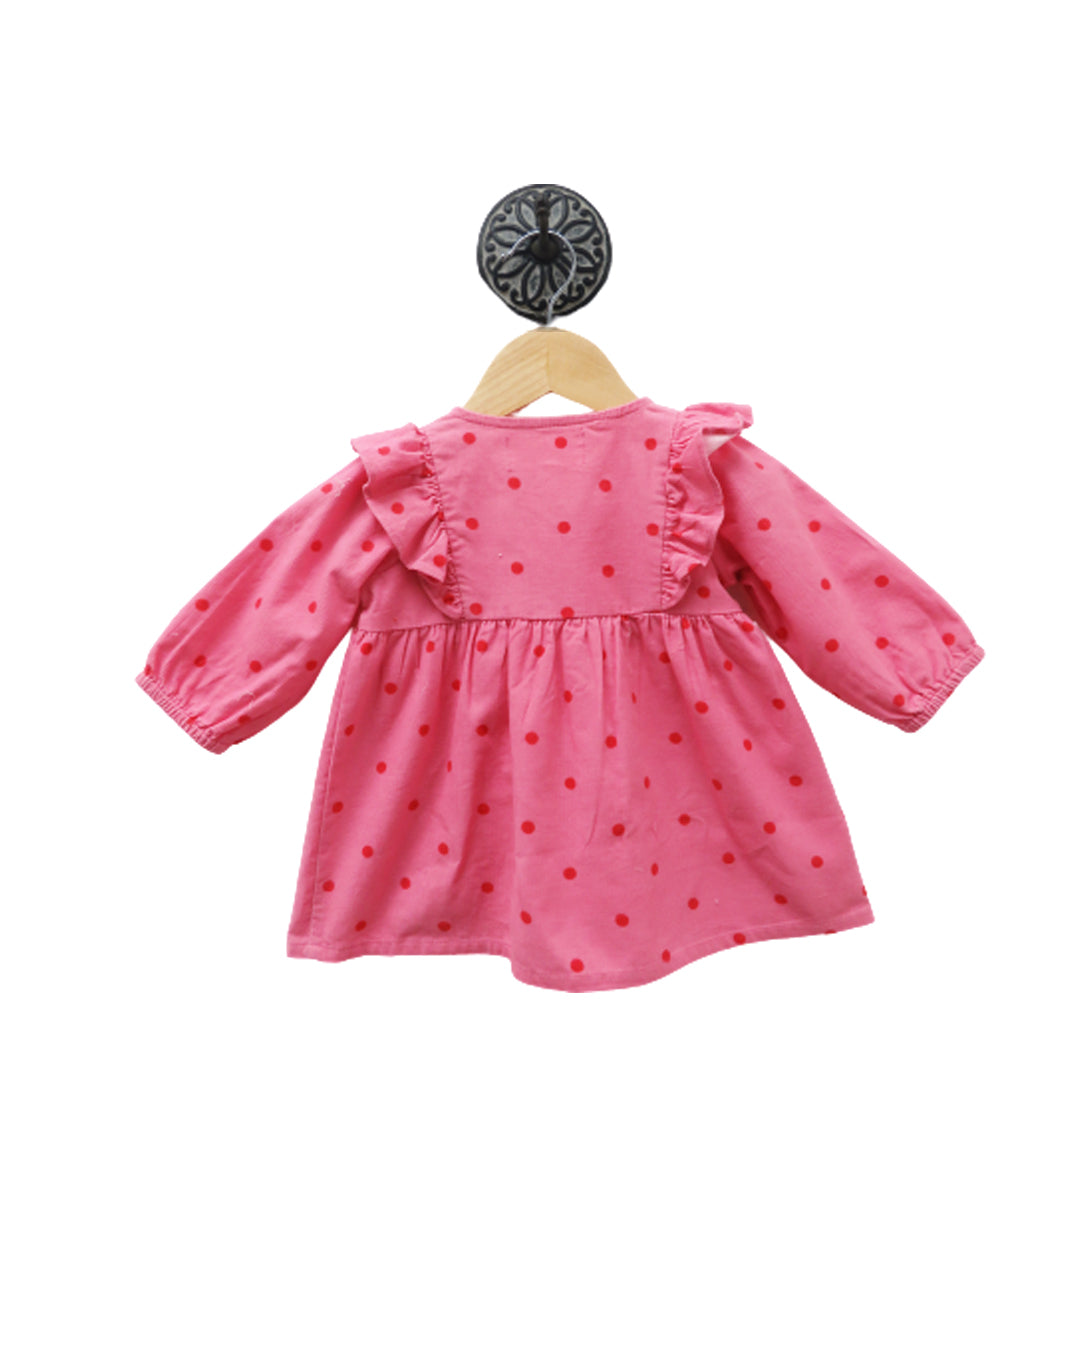 Pink Frilly Winter Dress With Red Polka Dots